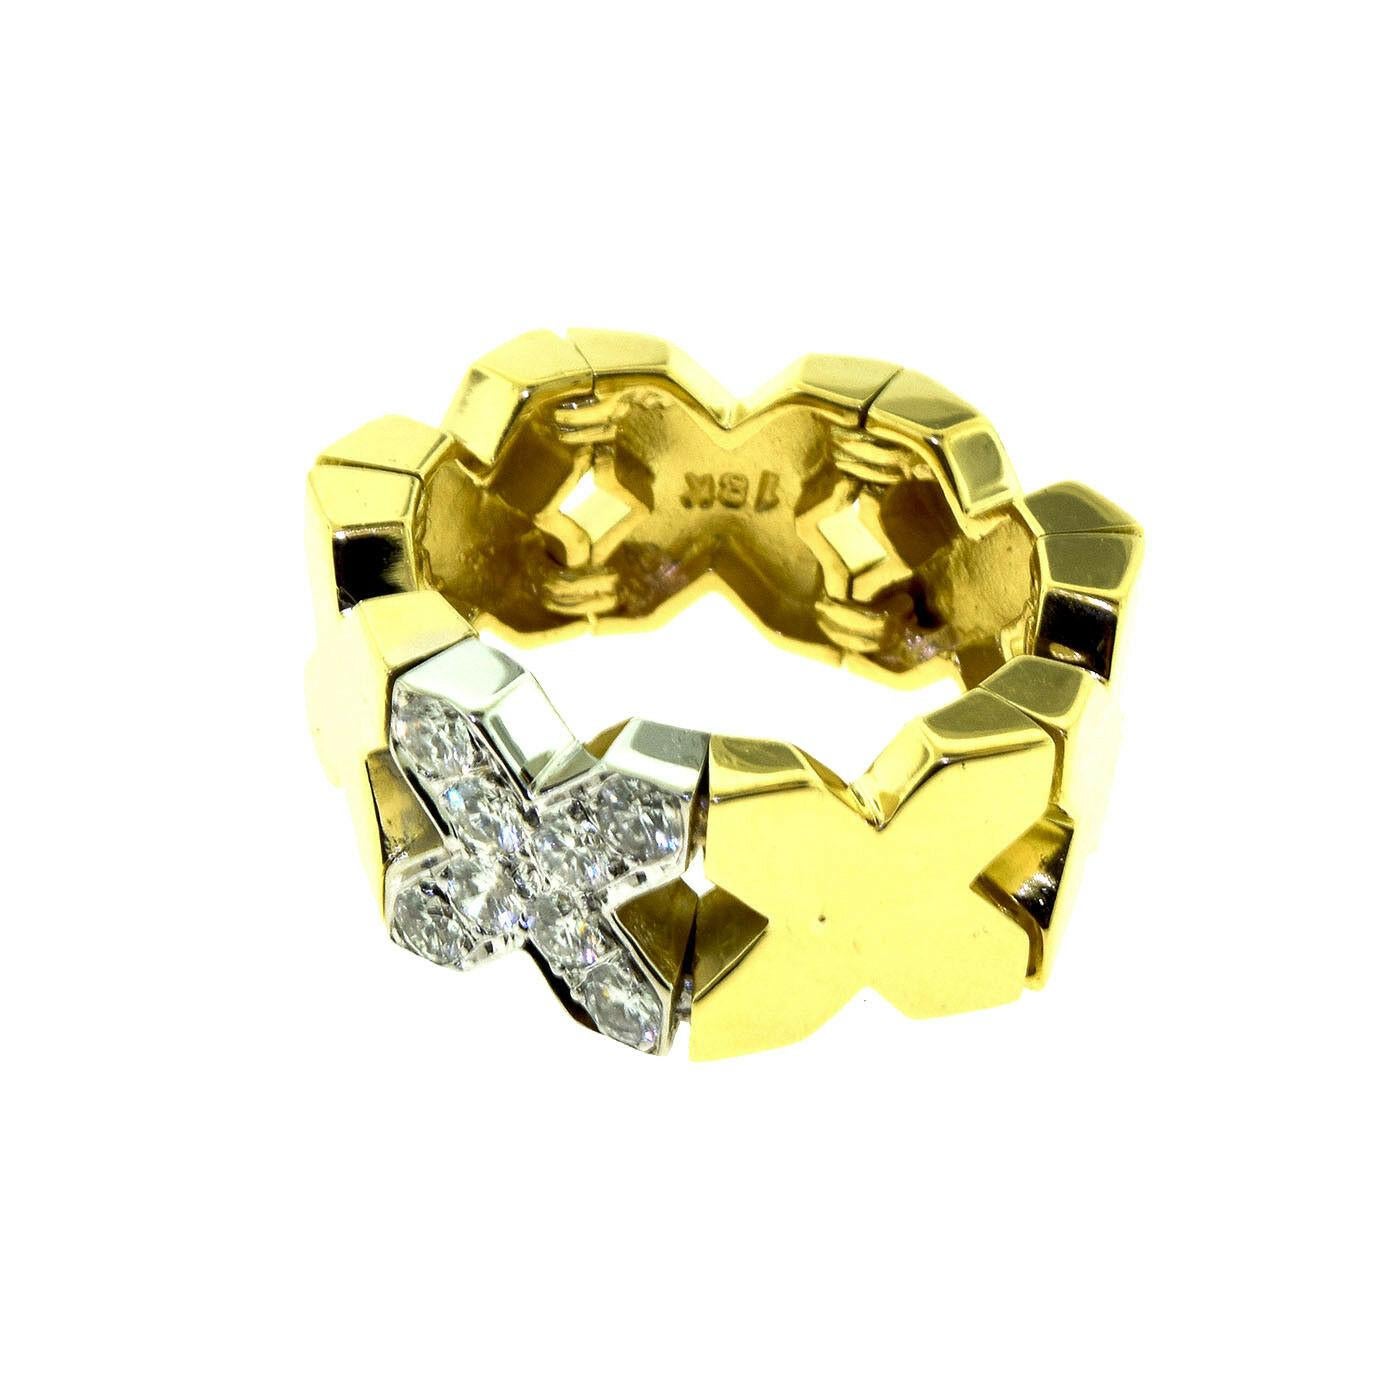 Brilliance Jewels, Miami
Questions? Call Us Anytime!
786,482,8100

Ring Size: 6.5 

Type: 